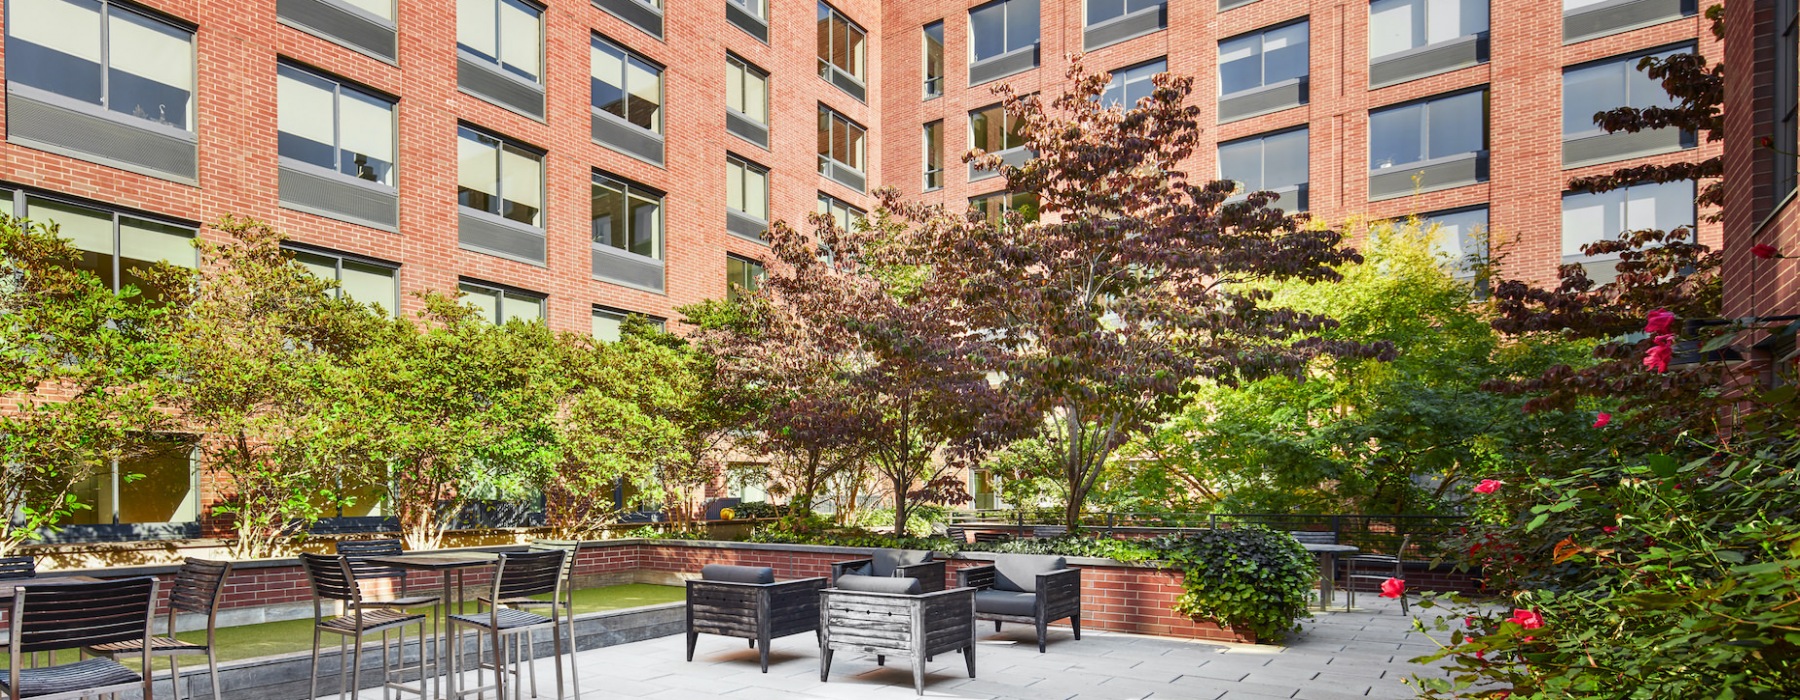 Brooklyn NY Apartments for Rent-50 North 5th Apartments Brick Courtyard With Multiple Seating Areas And Surrounding Trees